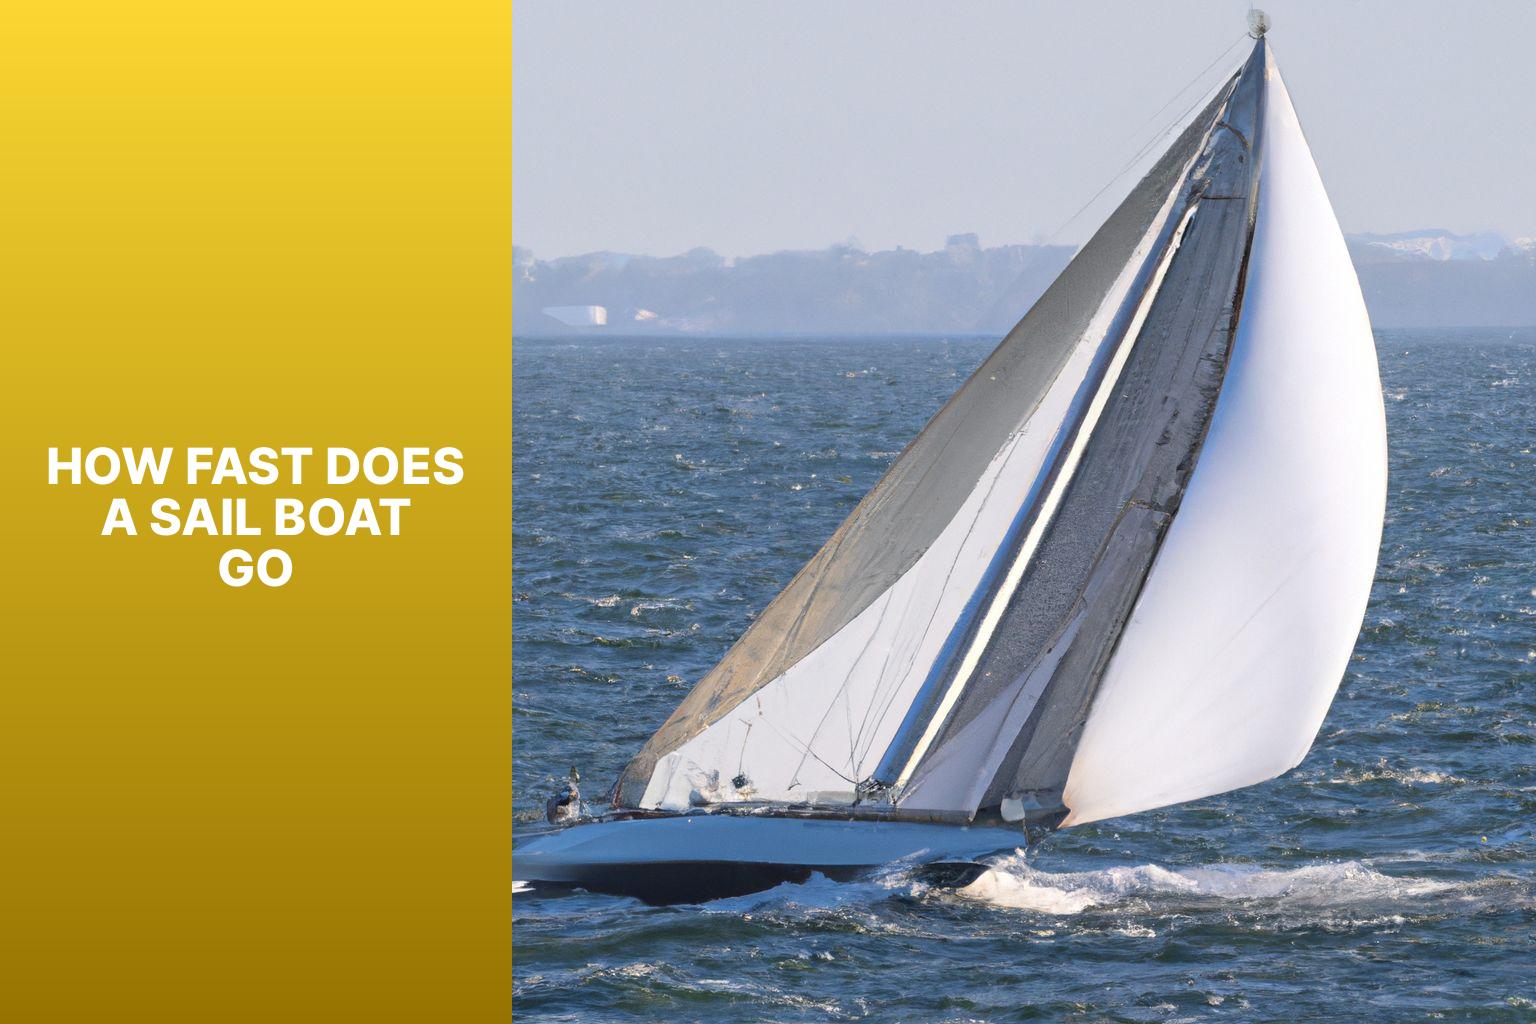 Discover the Speed of Sailboats: How Fast Does a Sail Boat Go?